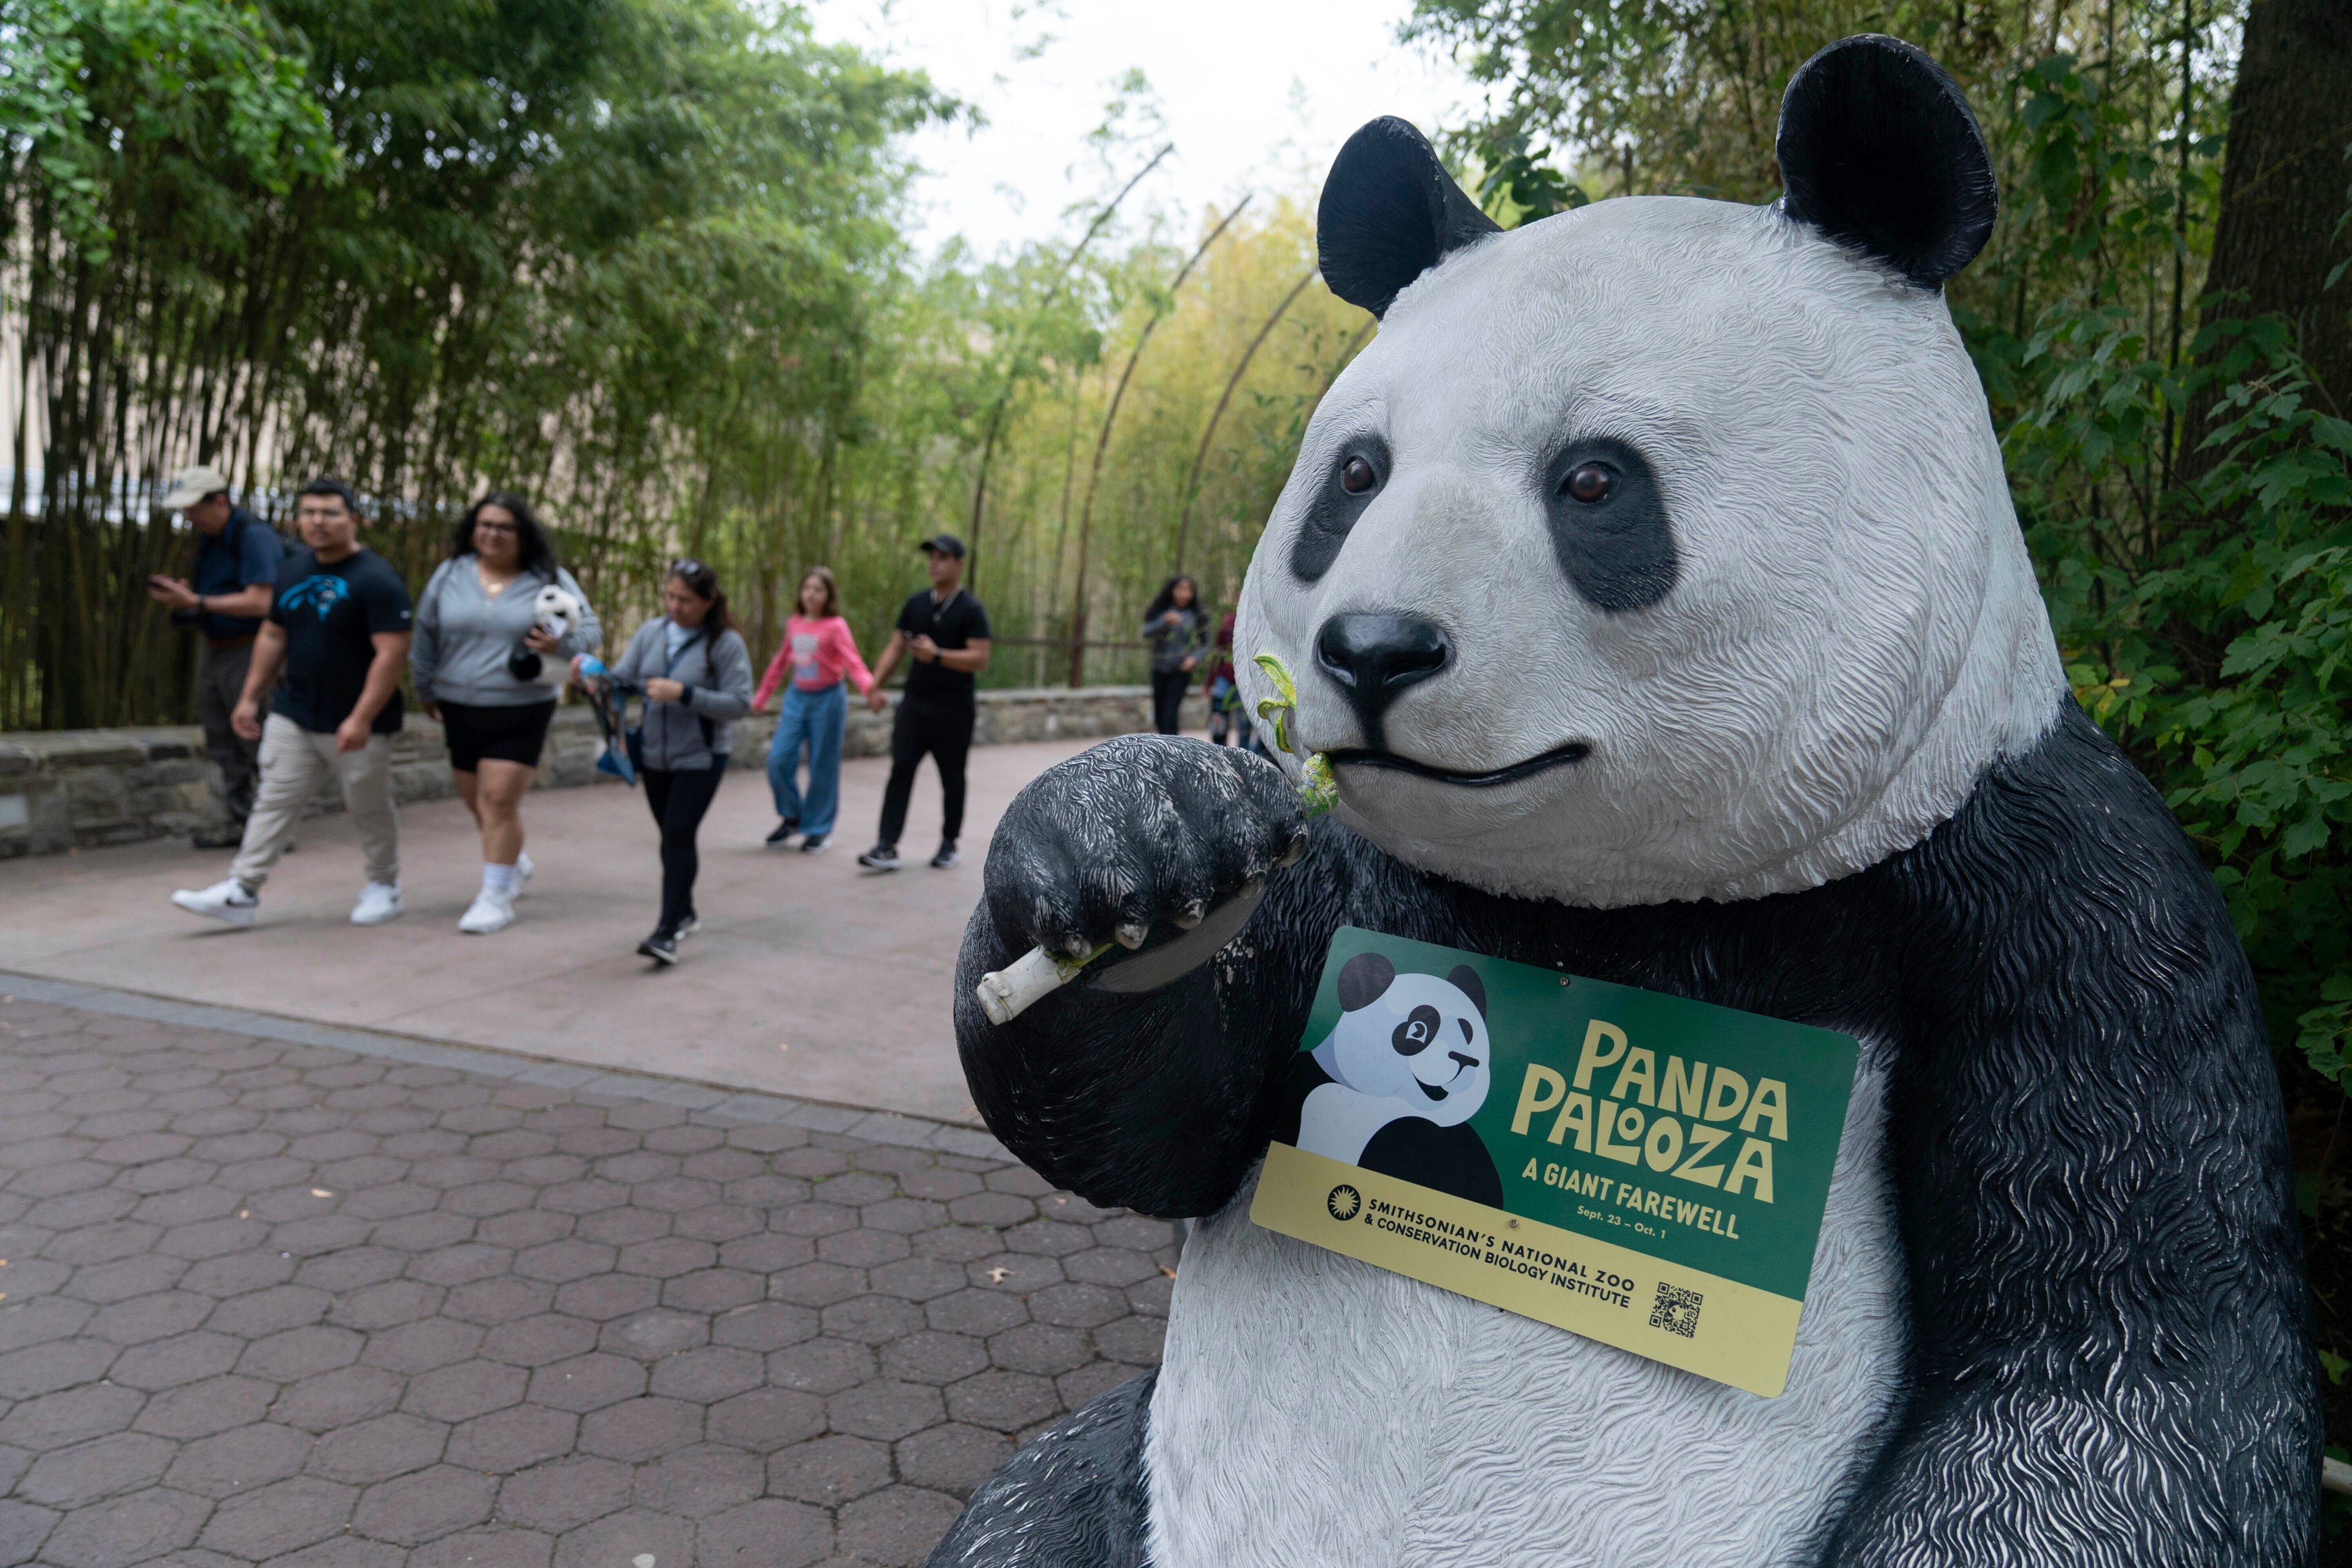 The giant panda exhibition at the National Zoo in Washington on September 28, ahead of the departure of three pandas earlier this month. Photo: AP